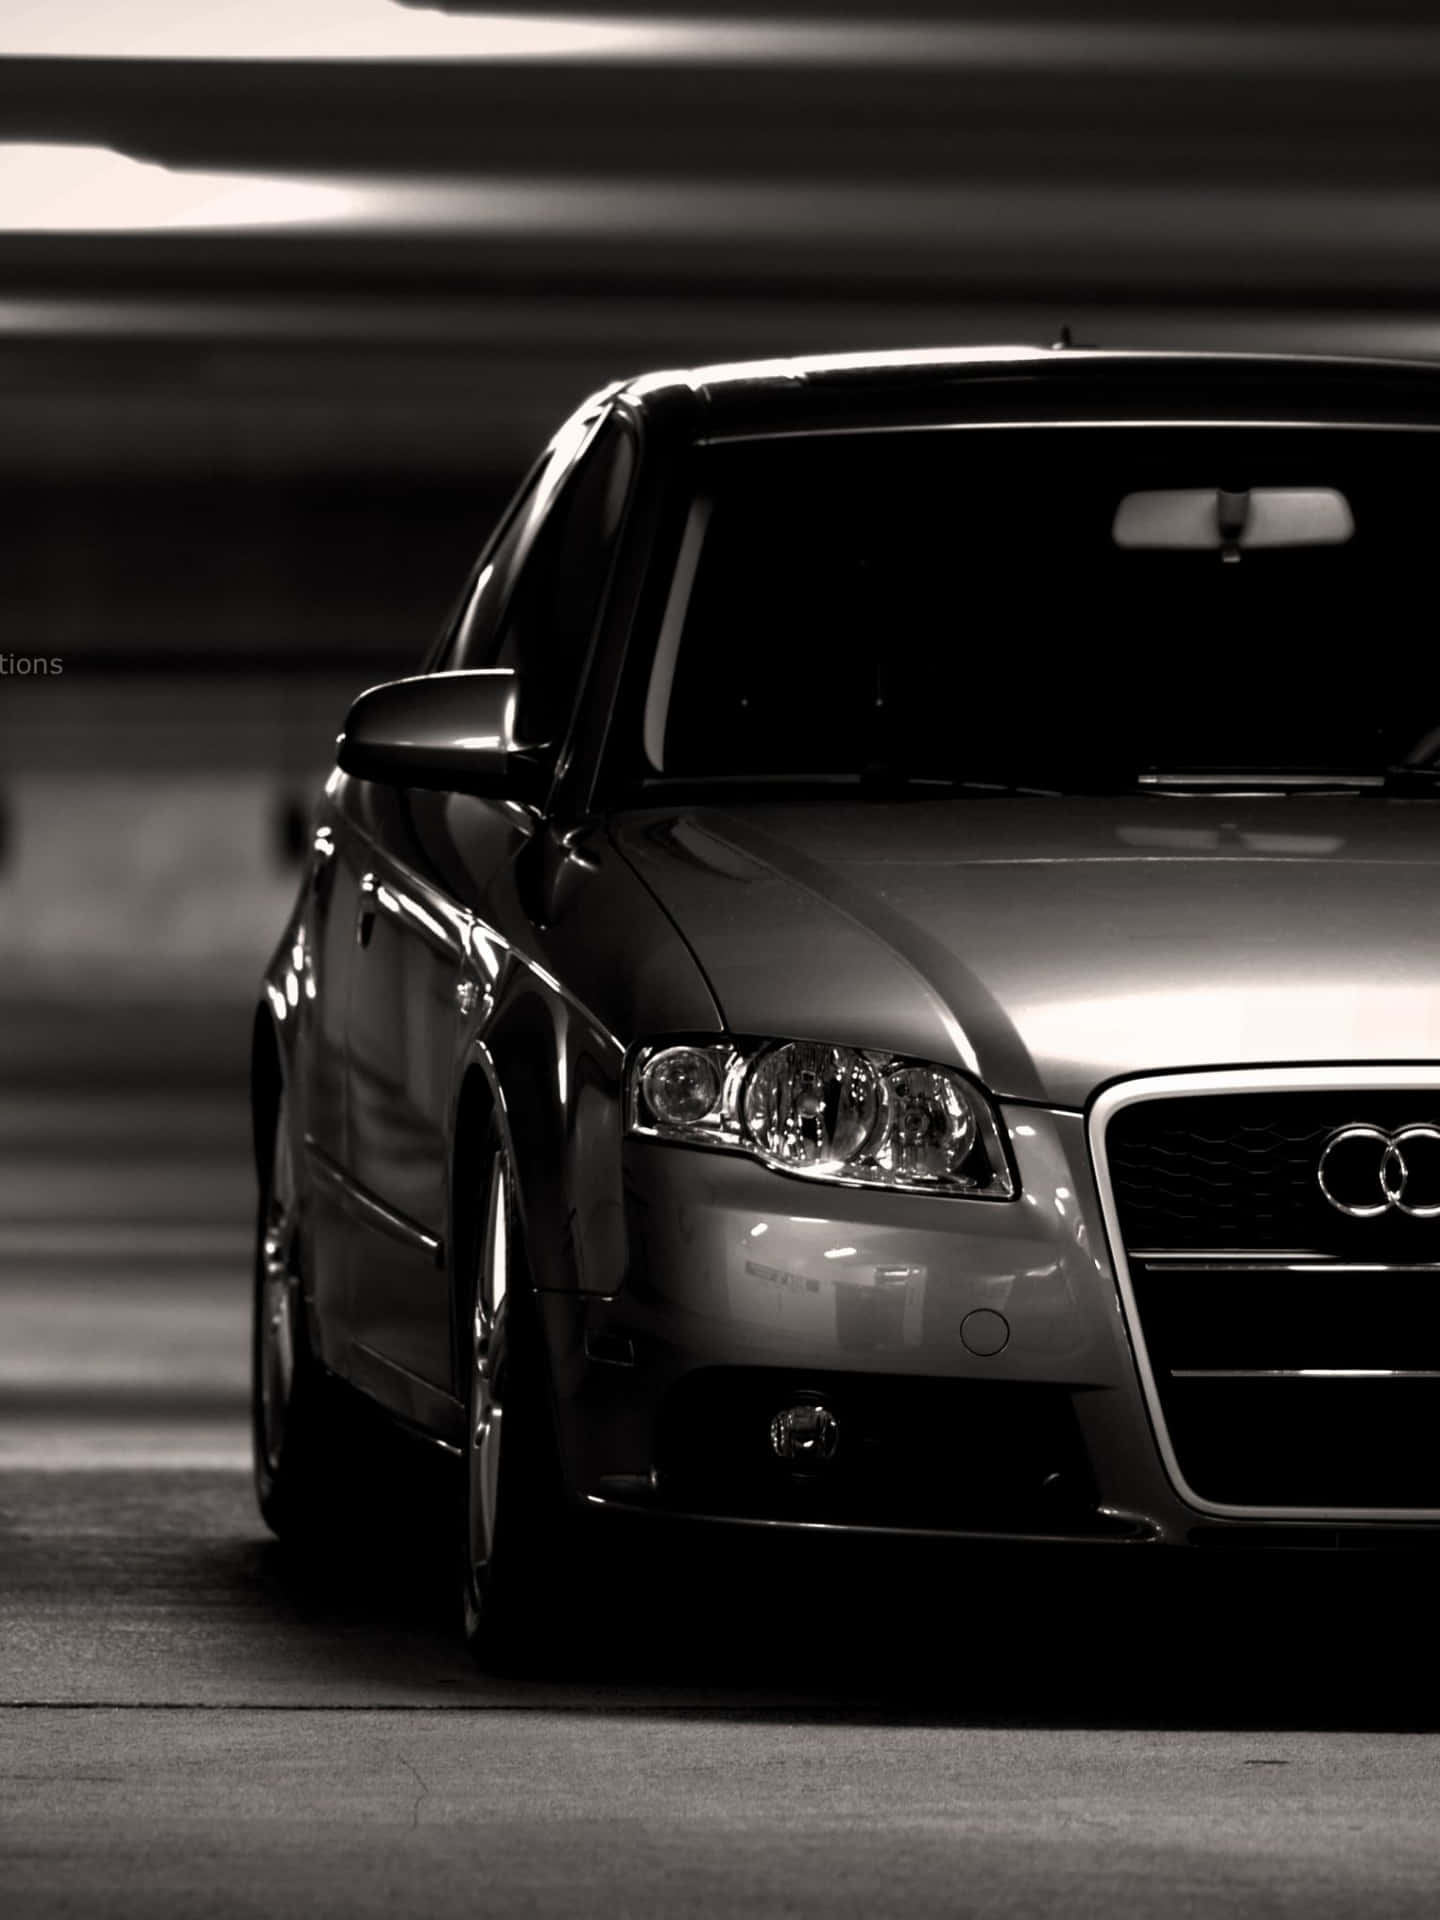 Caption: Sleek and Sophisticated Audi A4 in Action Wallpaper